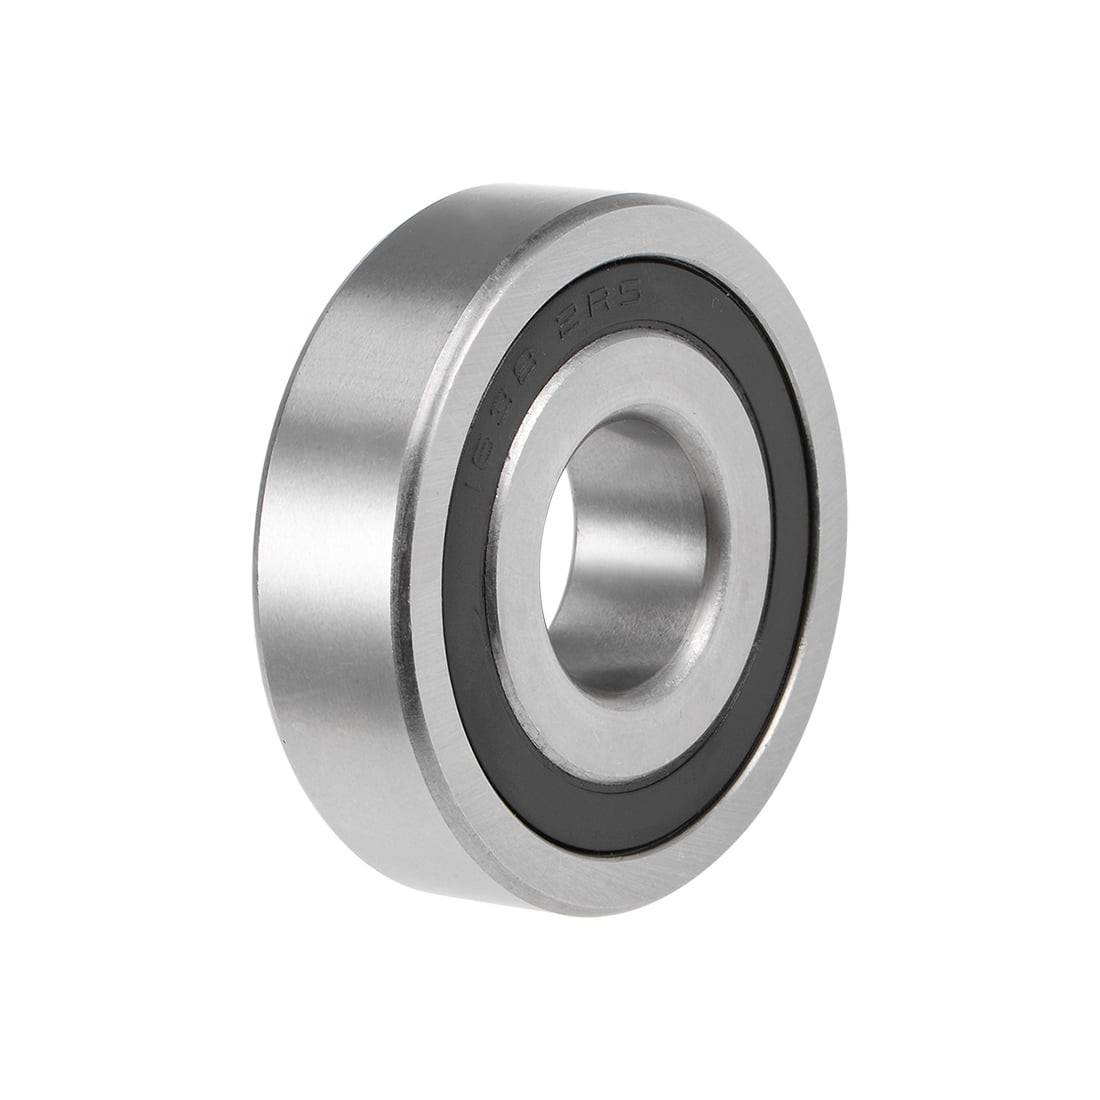 sourcing map F636ZZ Flanged Ball Bearing 6x22x7mm Double Metal Shielded Chrome Steel Bearings 4pcs GCr15